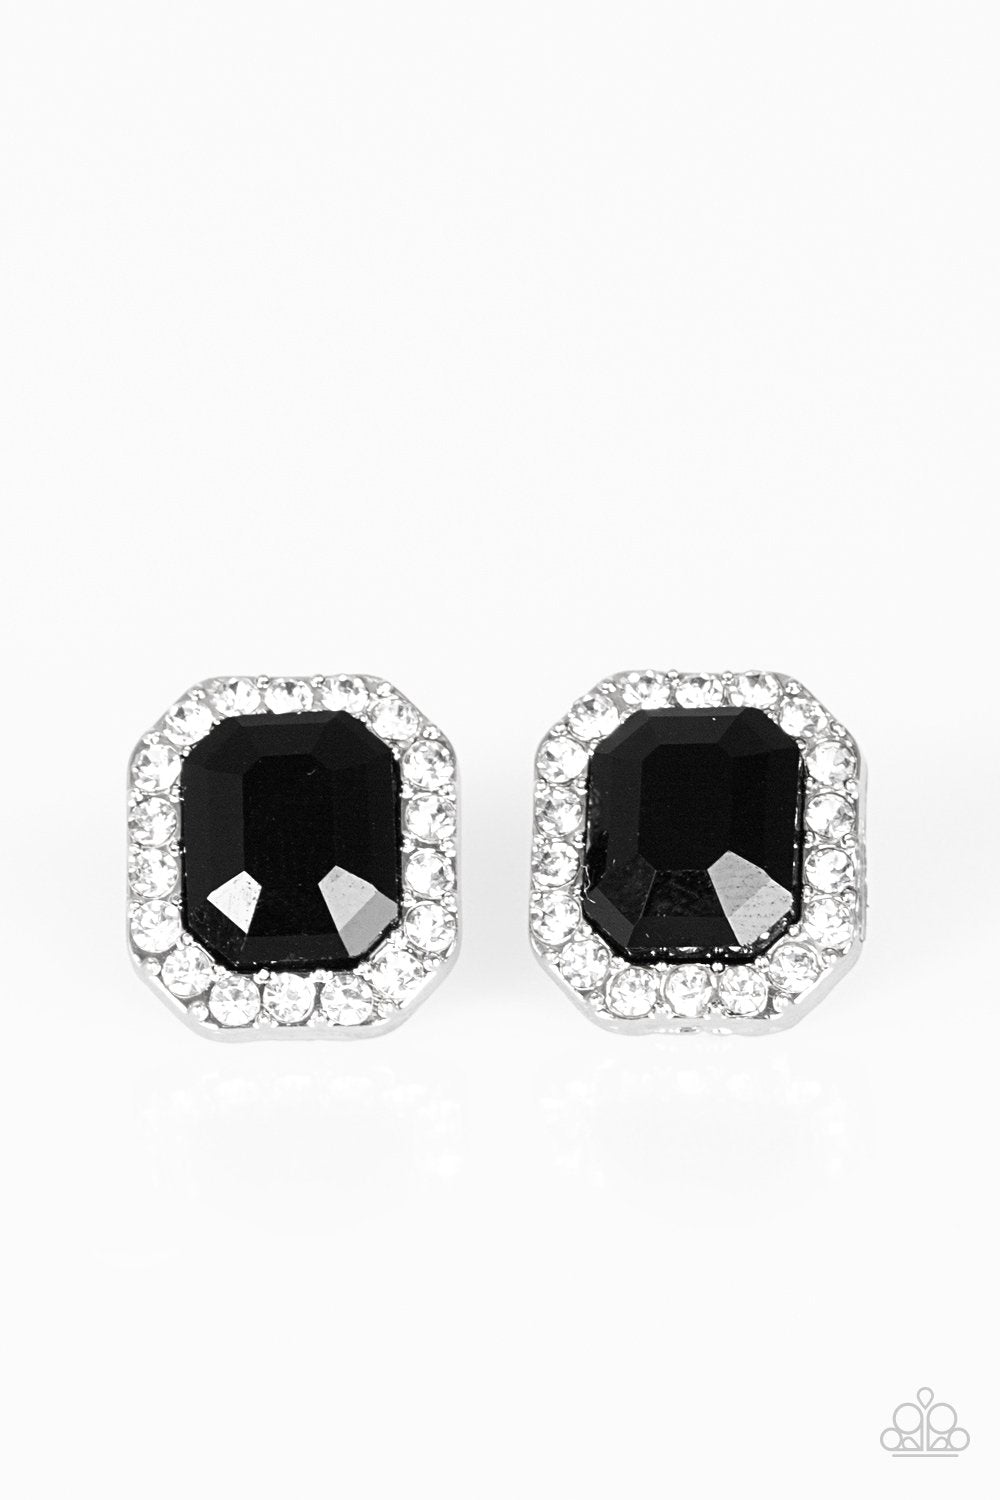 Bride Squad Black and White Rhinestone Post Earrings - Paparazzi Accessories- lightbox - CarasShop.com - $5 Jewelry by Cara Jewels